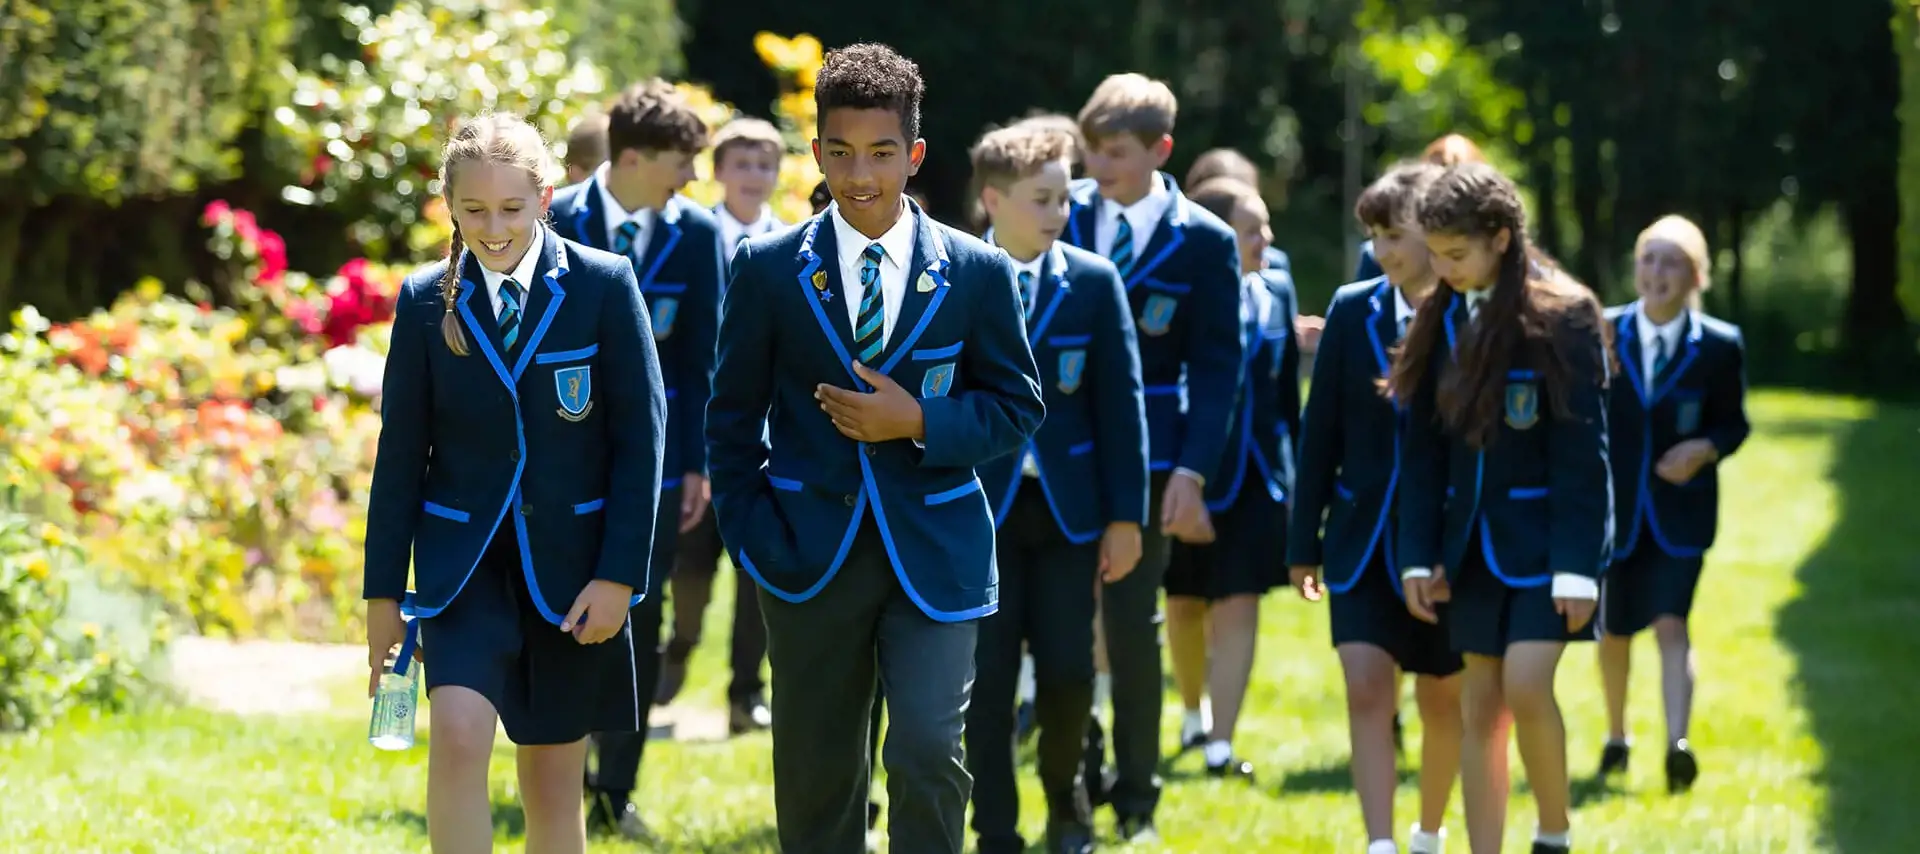 Pupils at The Gregg School walking in the grounds